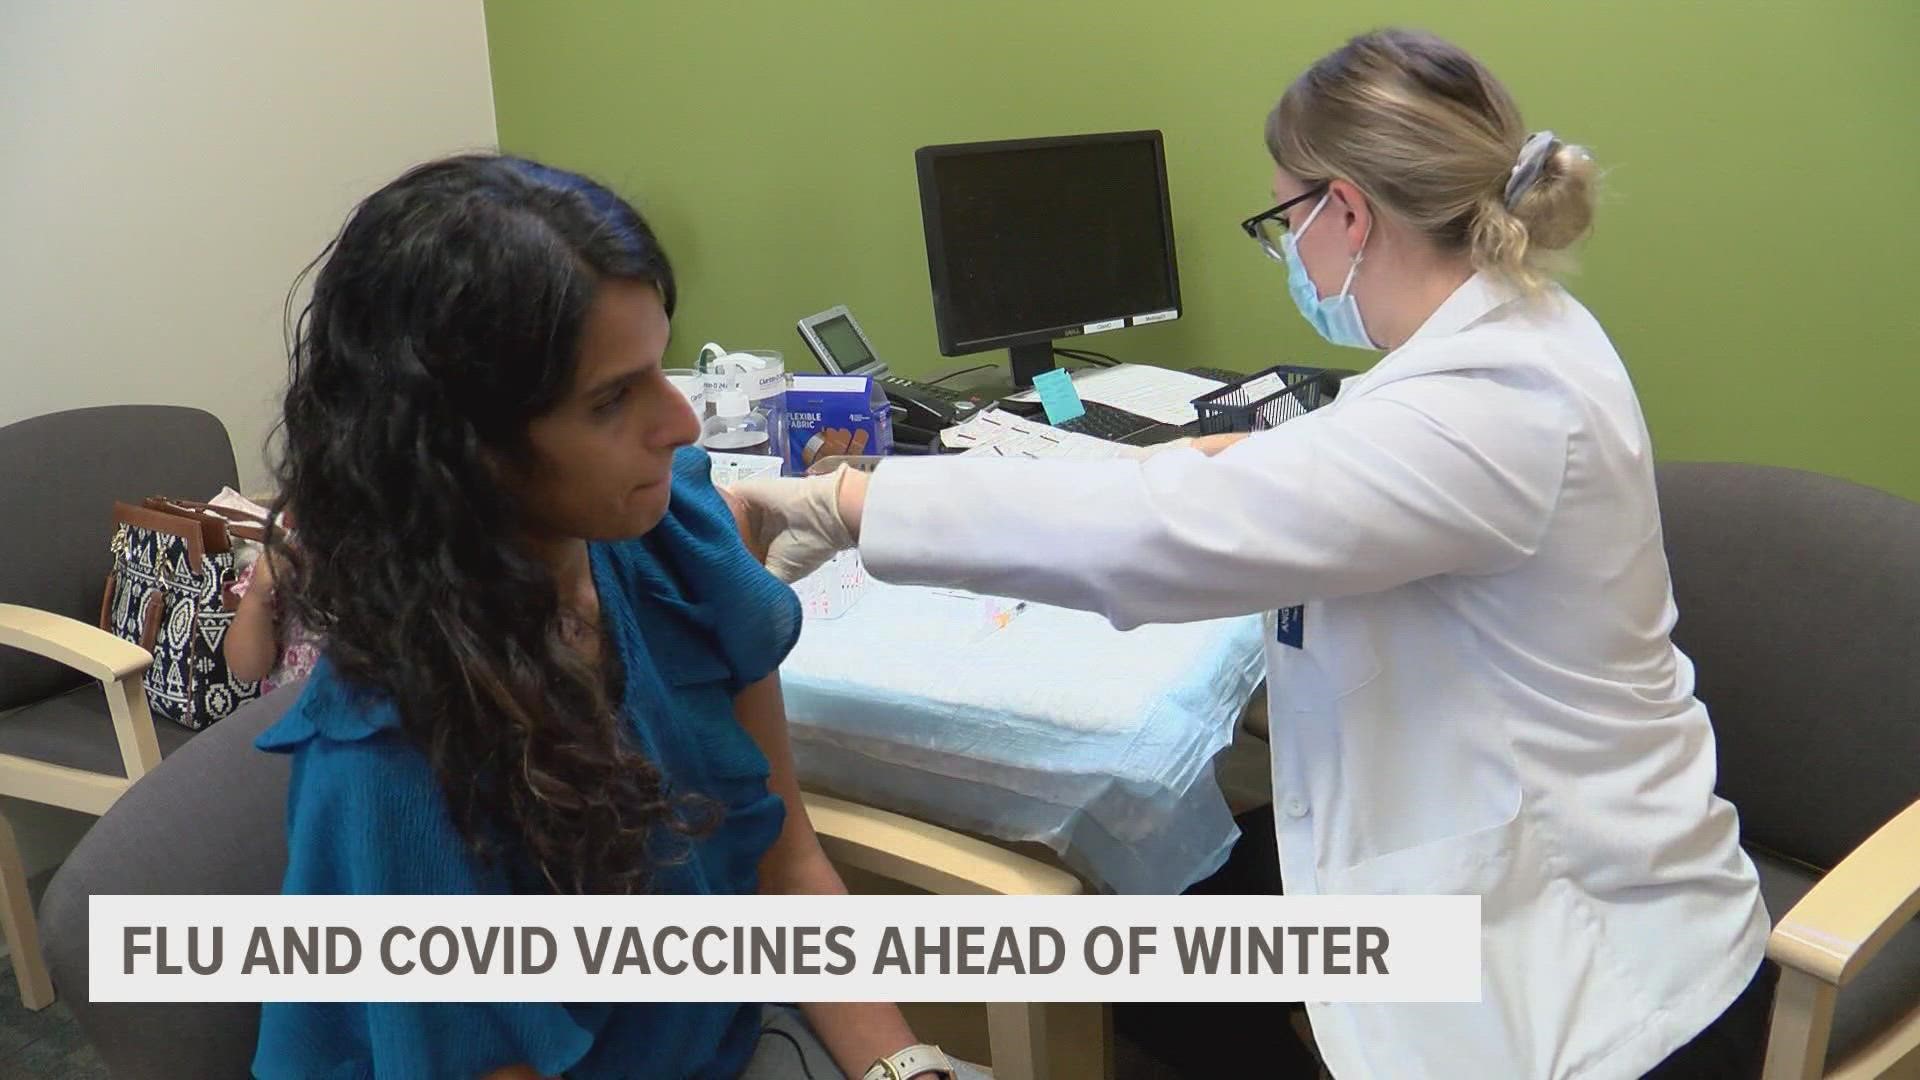 With cold weather right around the corner, health experts are concerned about the possibility of a difficult flu season.